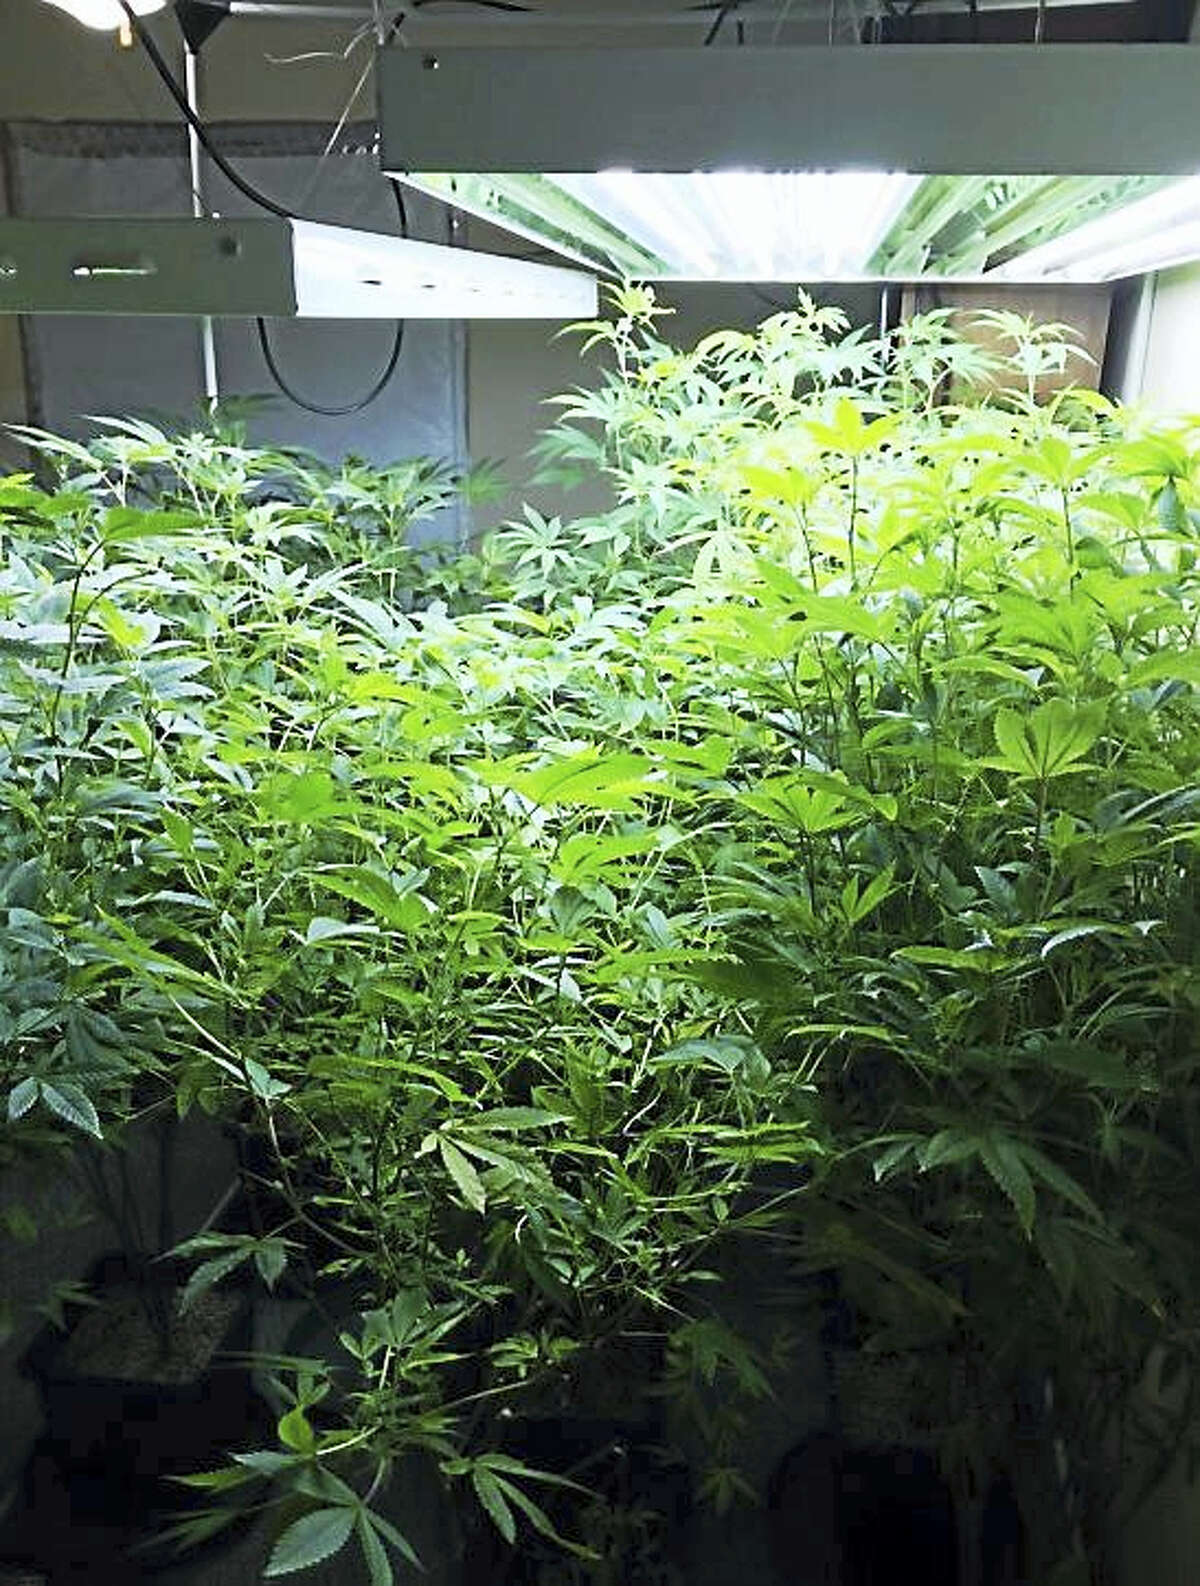 Two men and a woman were arrested Tuesday after authorities allegedly found dozens of mature marijuana plants and more than two pounds of package marijuana in a home at 29 Wildwood Lane in East Hampton.